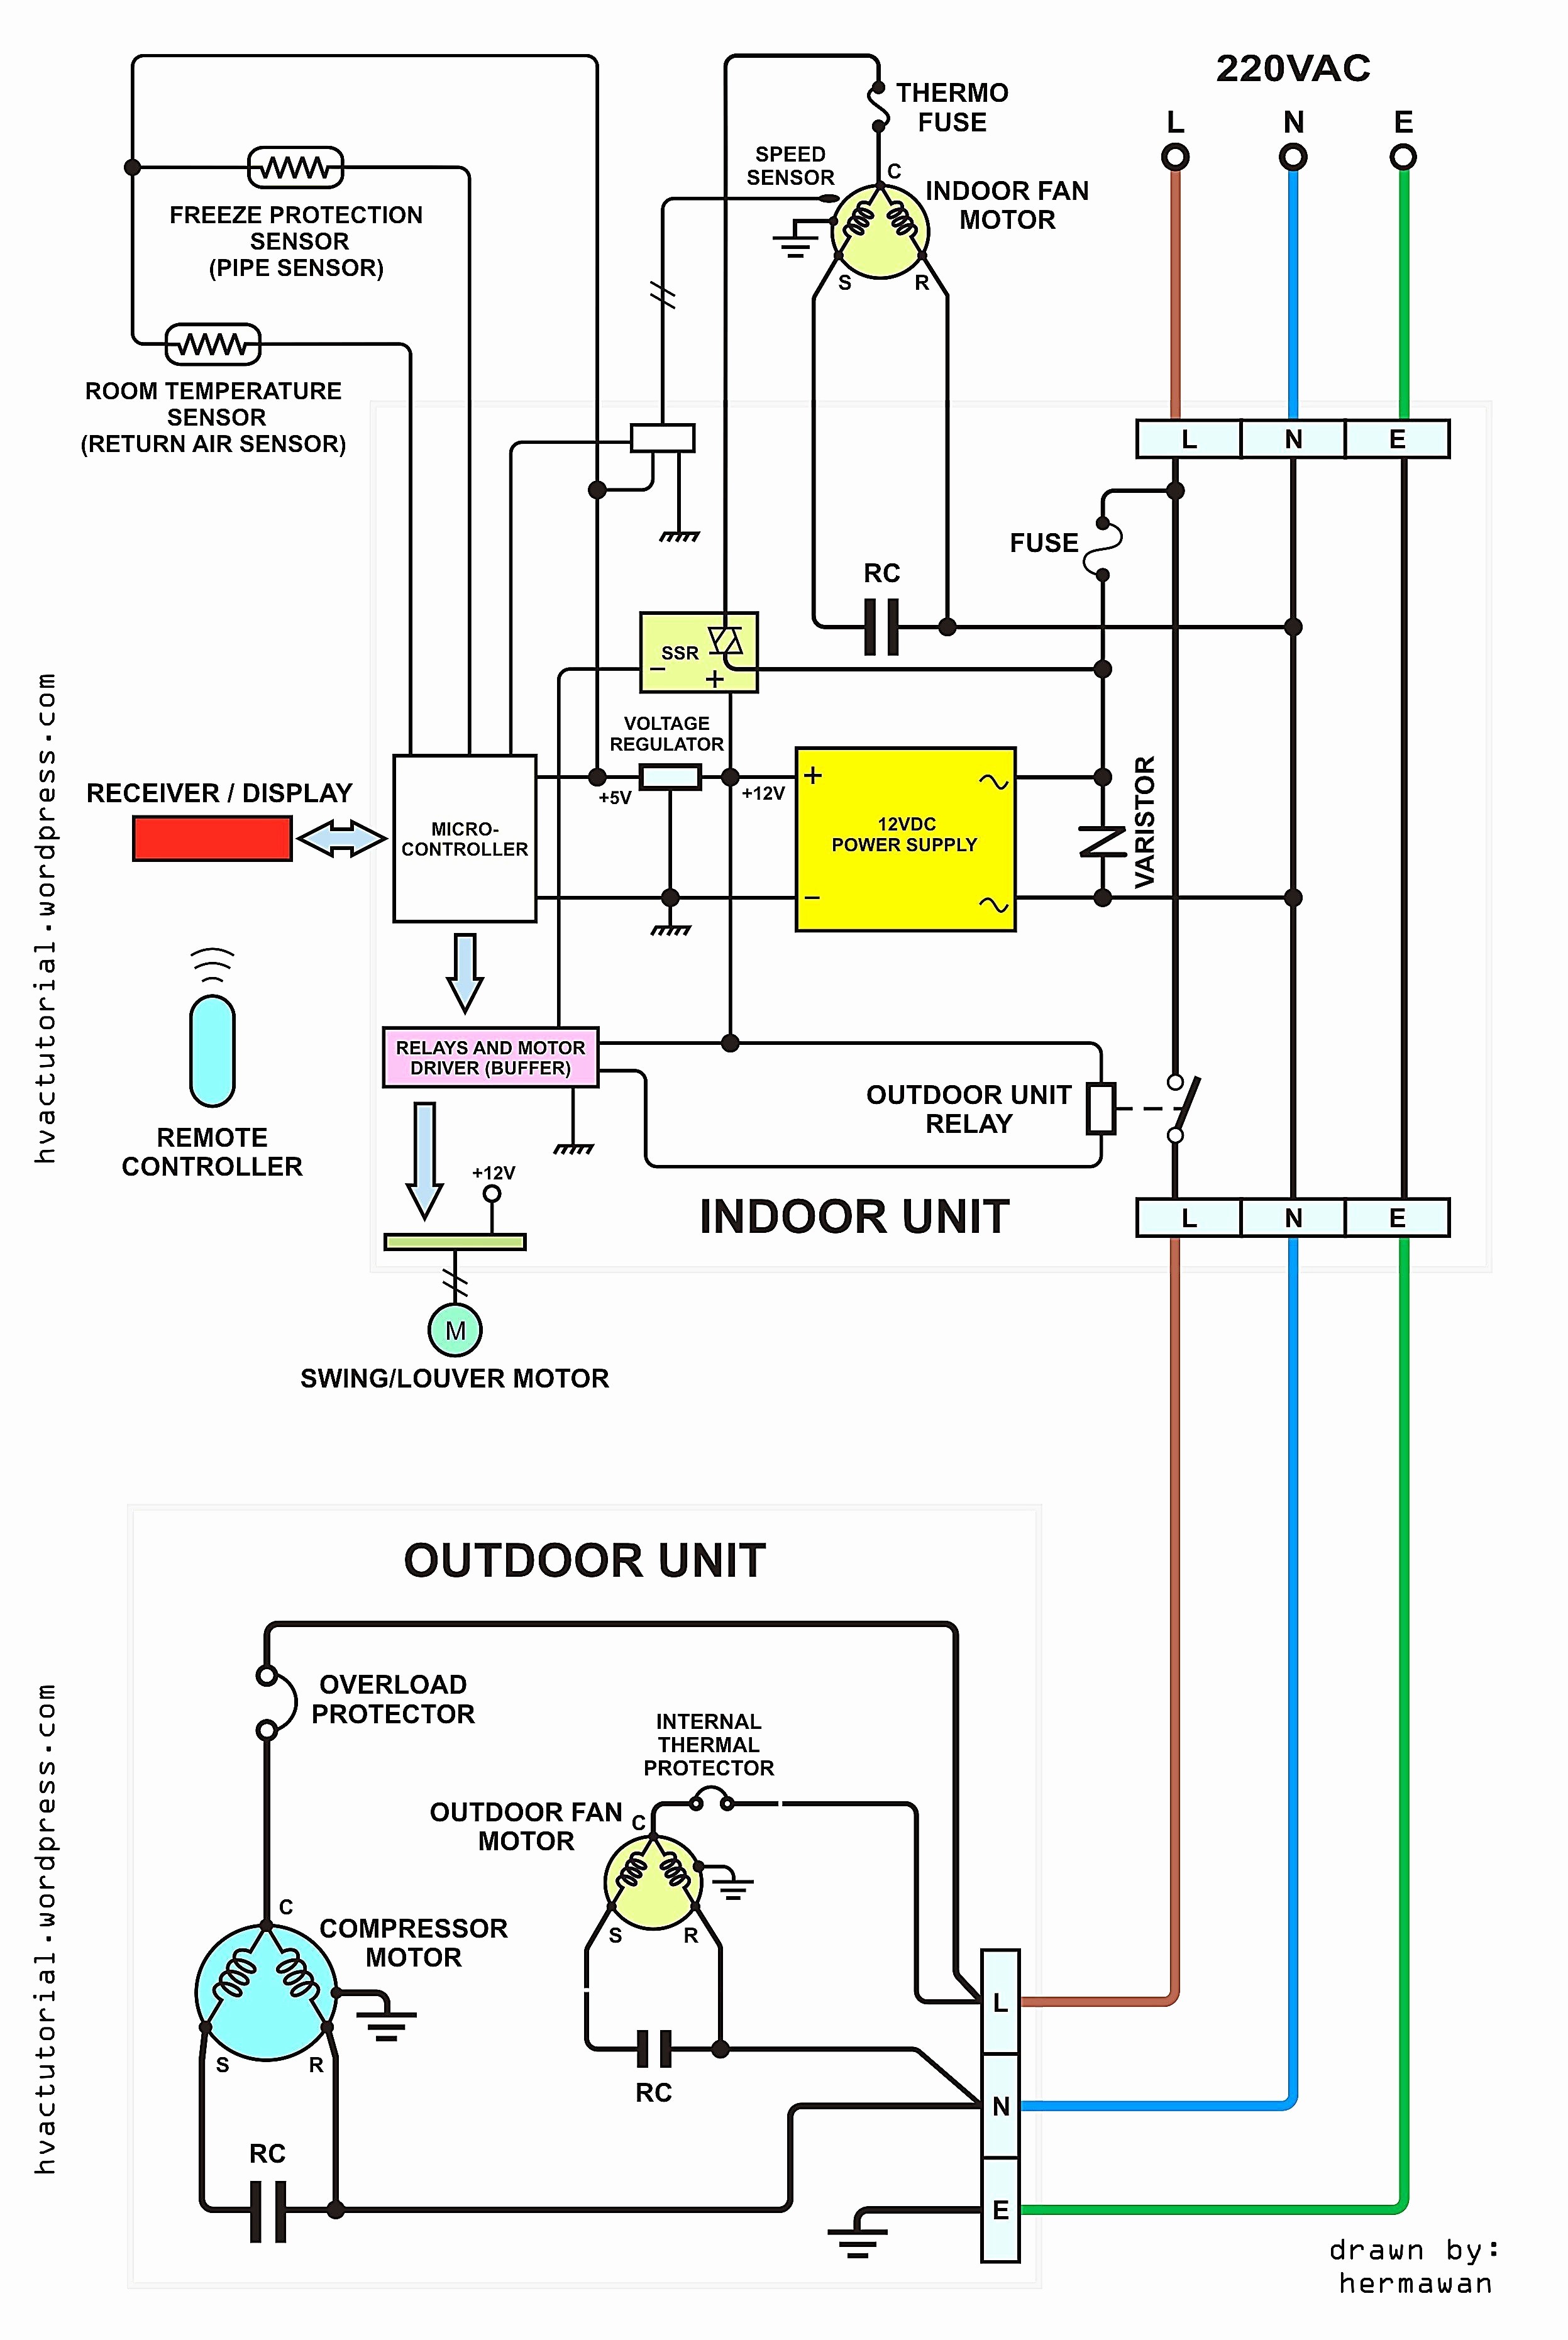 Duo therm thermostat Wiring Diagram Elegant Duo therm Rv Air Conditioner Wiring Diagram Fresh Duo therm